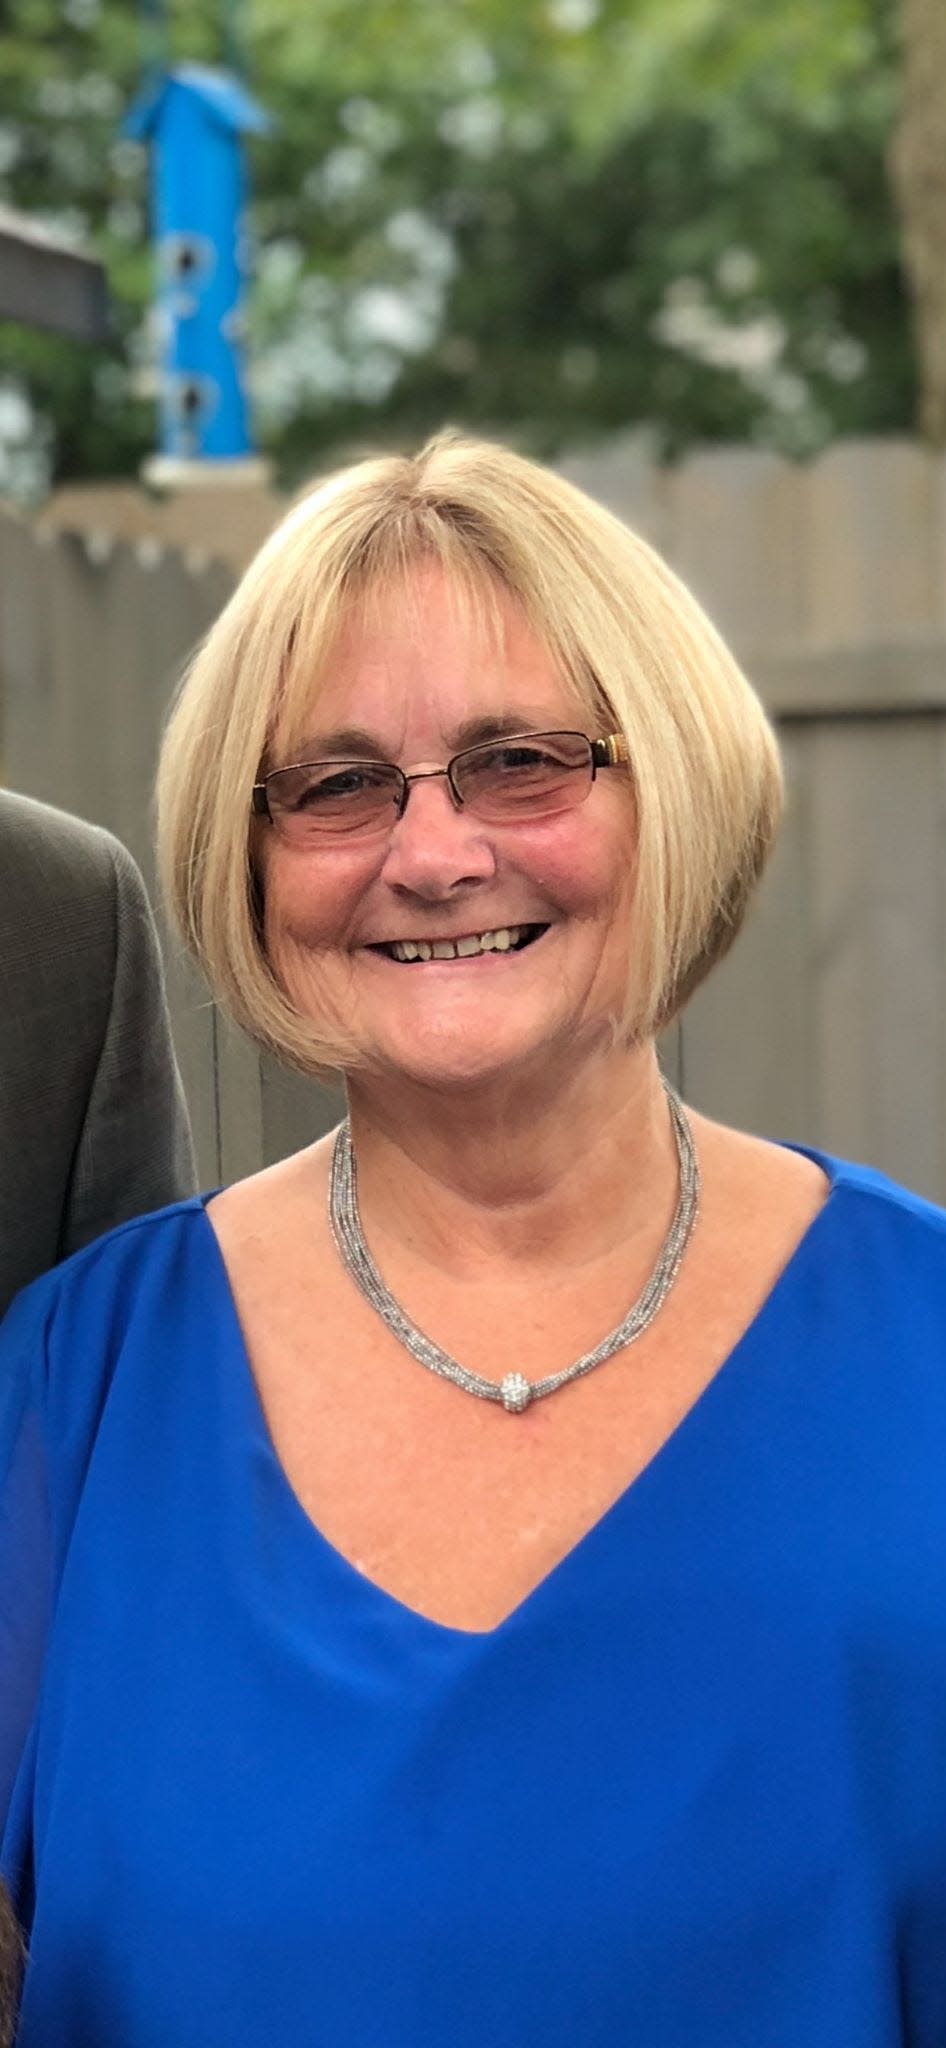 Kathy Eagan will serve as vice president of the Toms River Regional Board of Education in 2023.